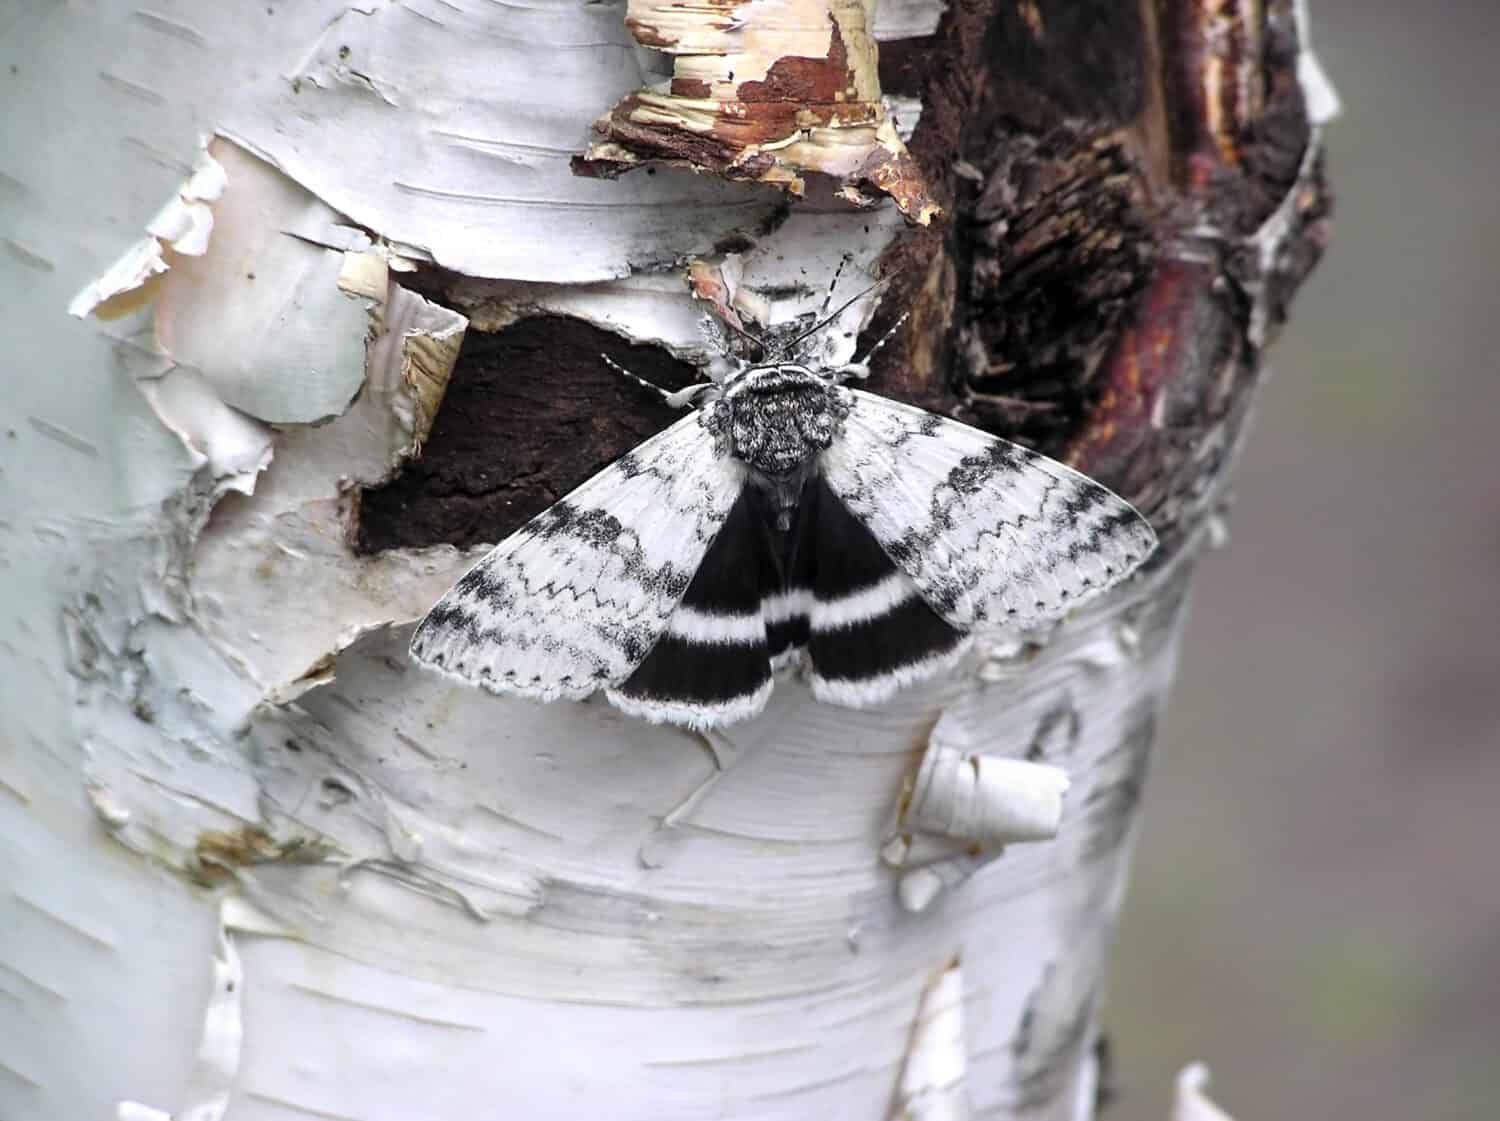 Perfect example of camouflage: a White underwing moth (Catocala relicta) resting and hiding on paper birch bark, almost invisible.